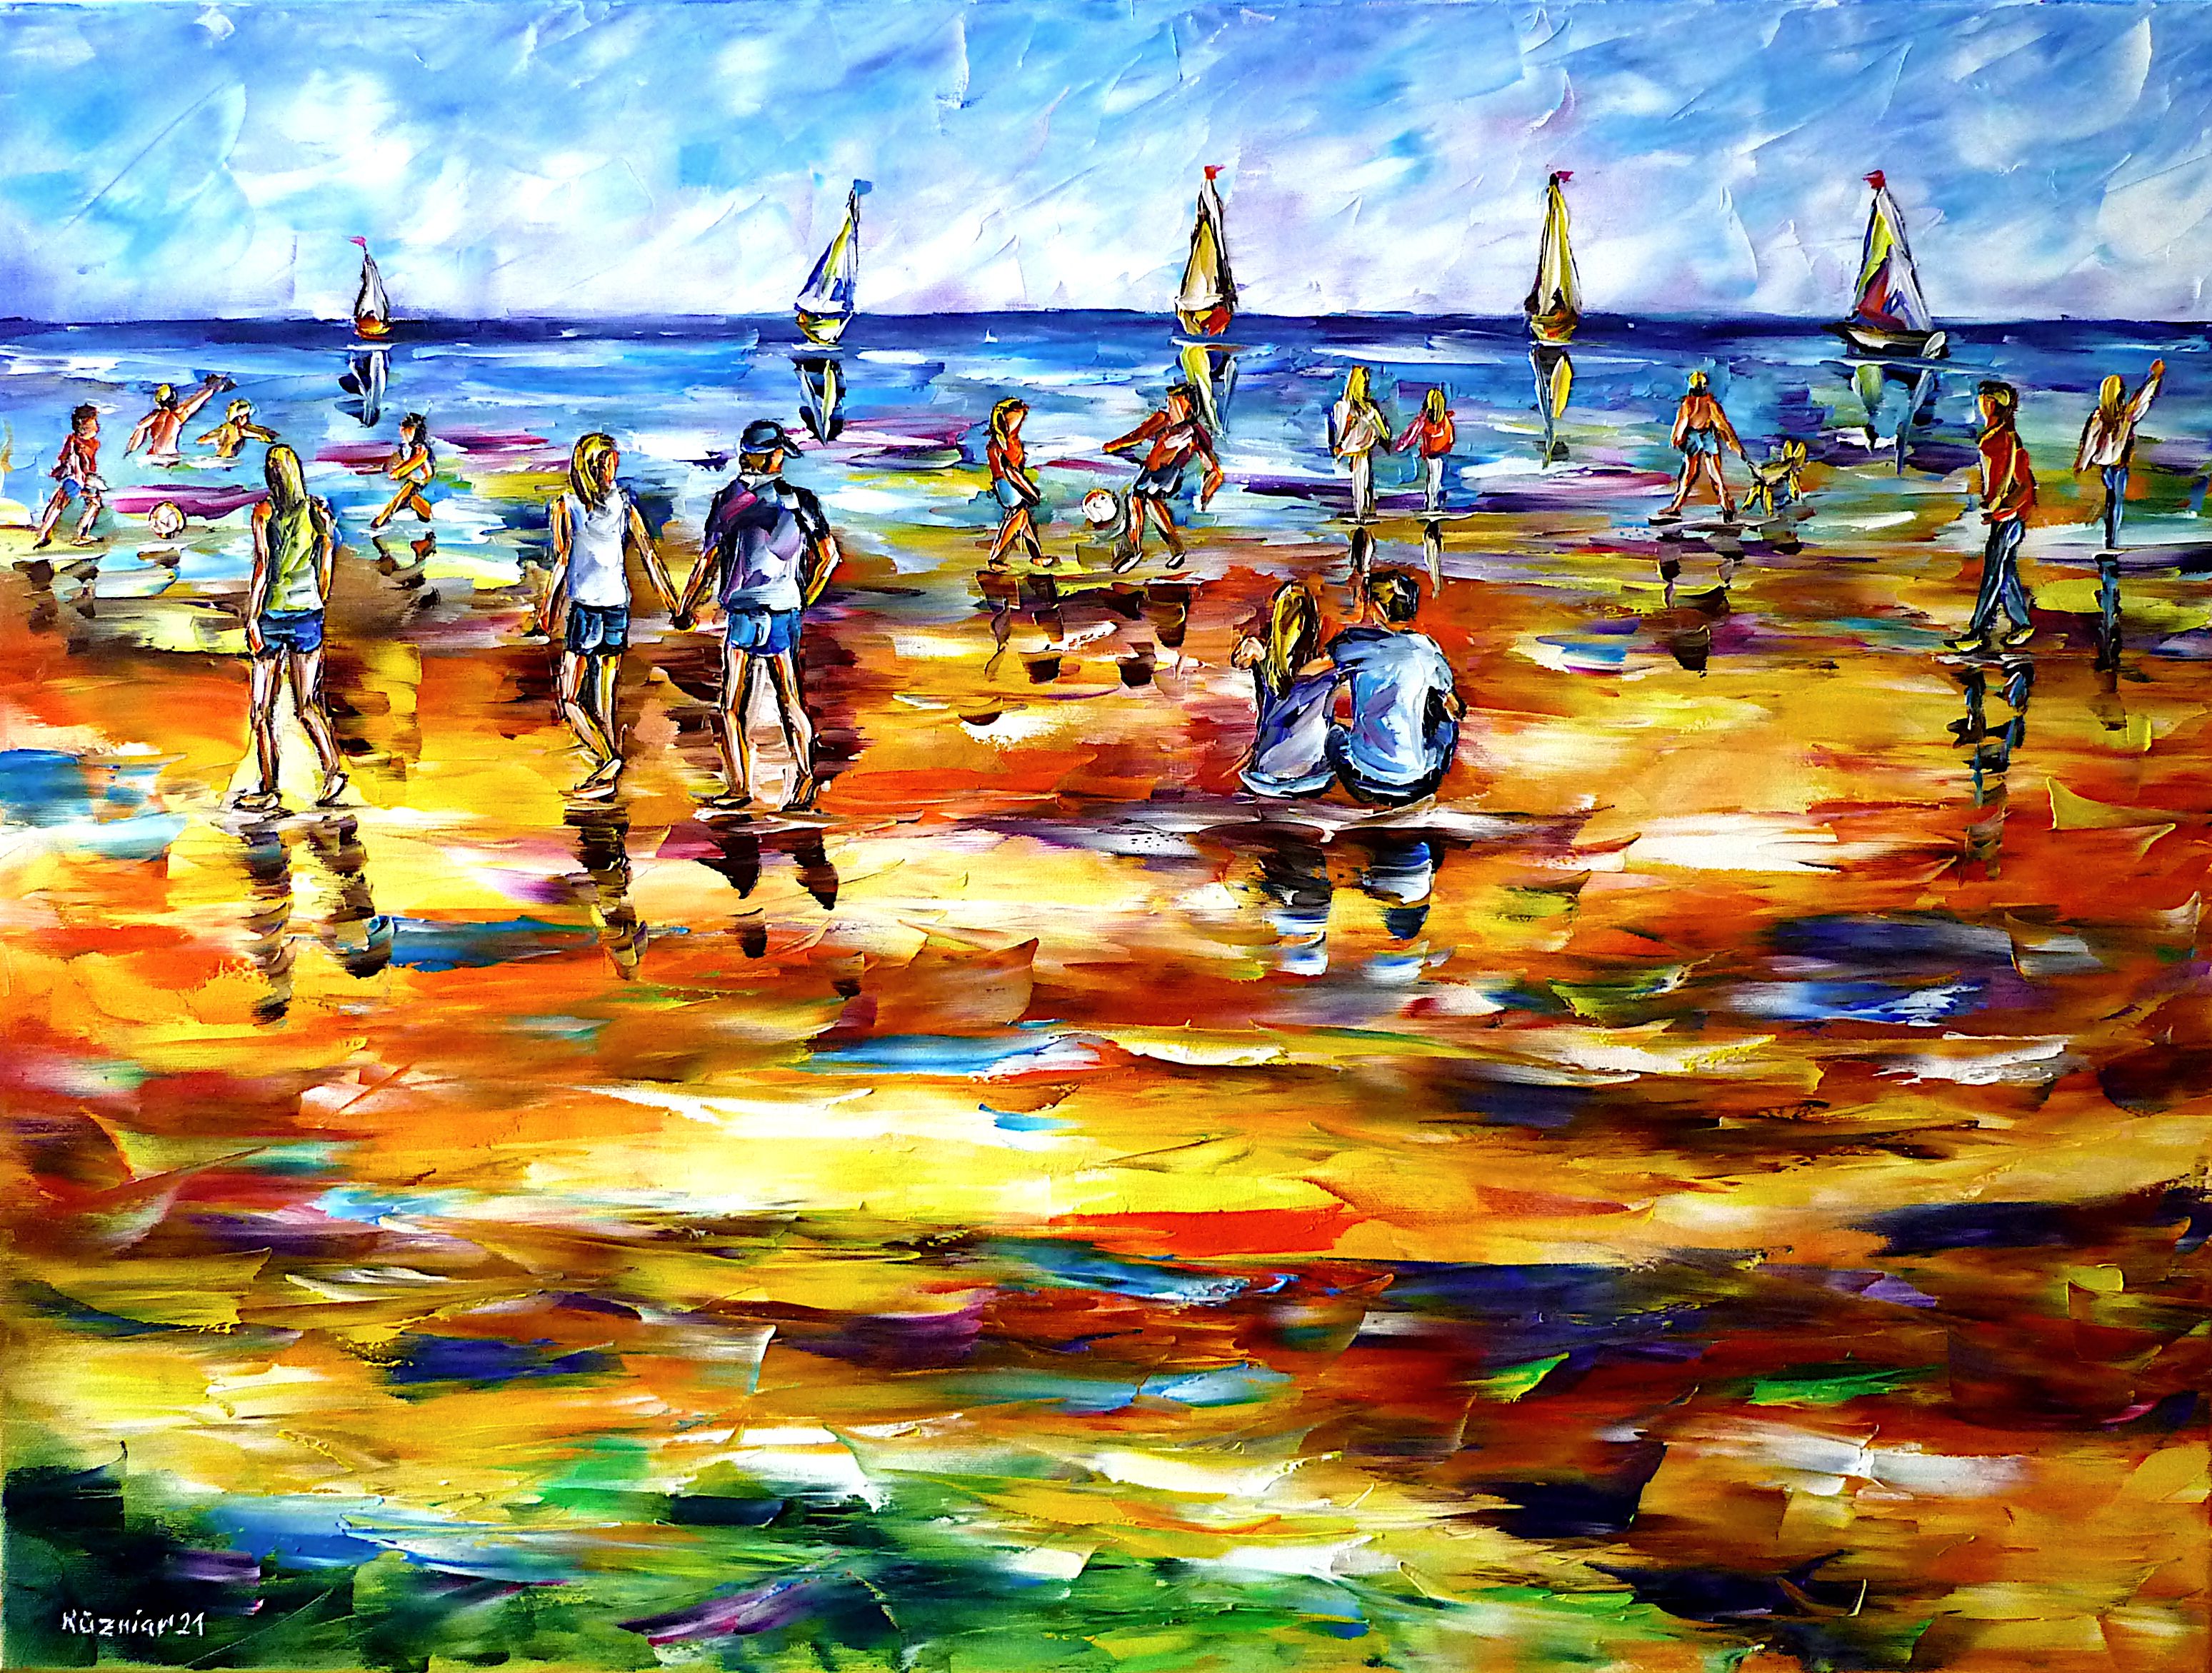 peopleonthebeach,beachscene,beachscenery,boatsonthesea,boatsonthehorizon,sailingboats,childrenonthebeach,walkonthebeach,beachwalk,playingchildren, peopleinthewater,swimmingpeople,bathingfun,beachpicture,beachpainting,loversonthebeach,seascape,beachabstract,peopleabstract,swimmingchildren,summeratthesea, summerpicture,summerpainting,peopleinsummer,cheerfulpicture,joy,friendlypicture,friendlypainting,peace,peacefulpicture,peacefulpainting,paletteknifeoilpainting,modernart,impressionism,artdeco,abstractpainting,livelycolours,colorfulpainting,brightcolors,lightreflections,impastopainting,livingroomart,livingroompicture,livingroompainting